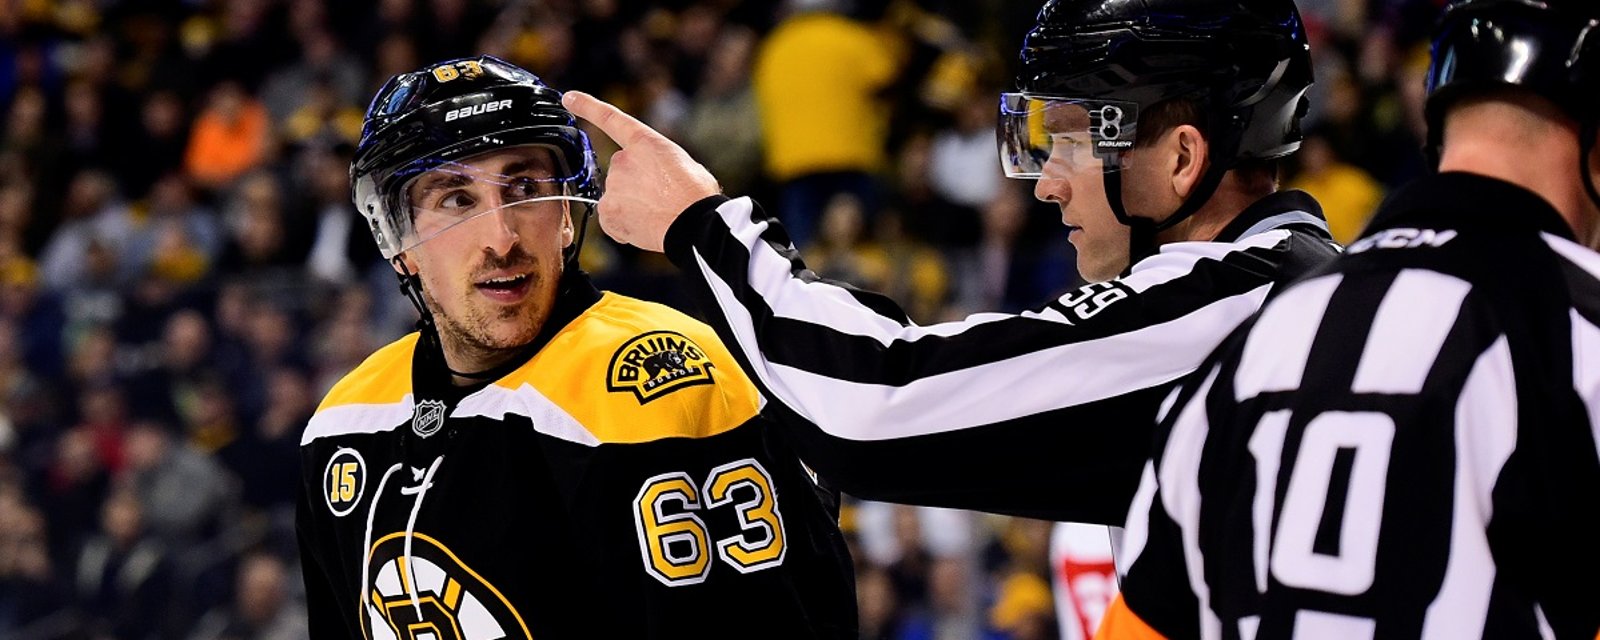 Brad Marchand goes off on NHL officials after being pulled out of the game.